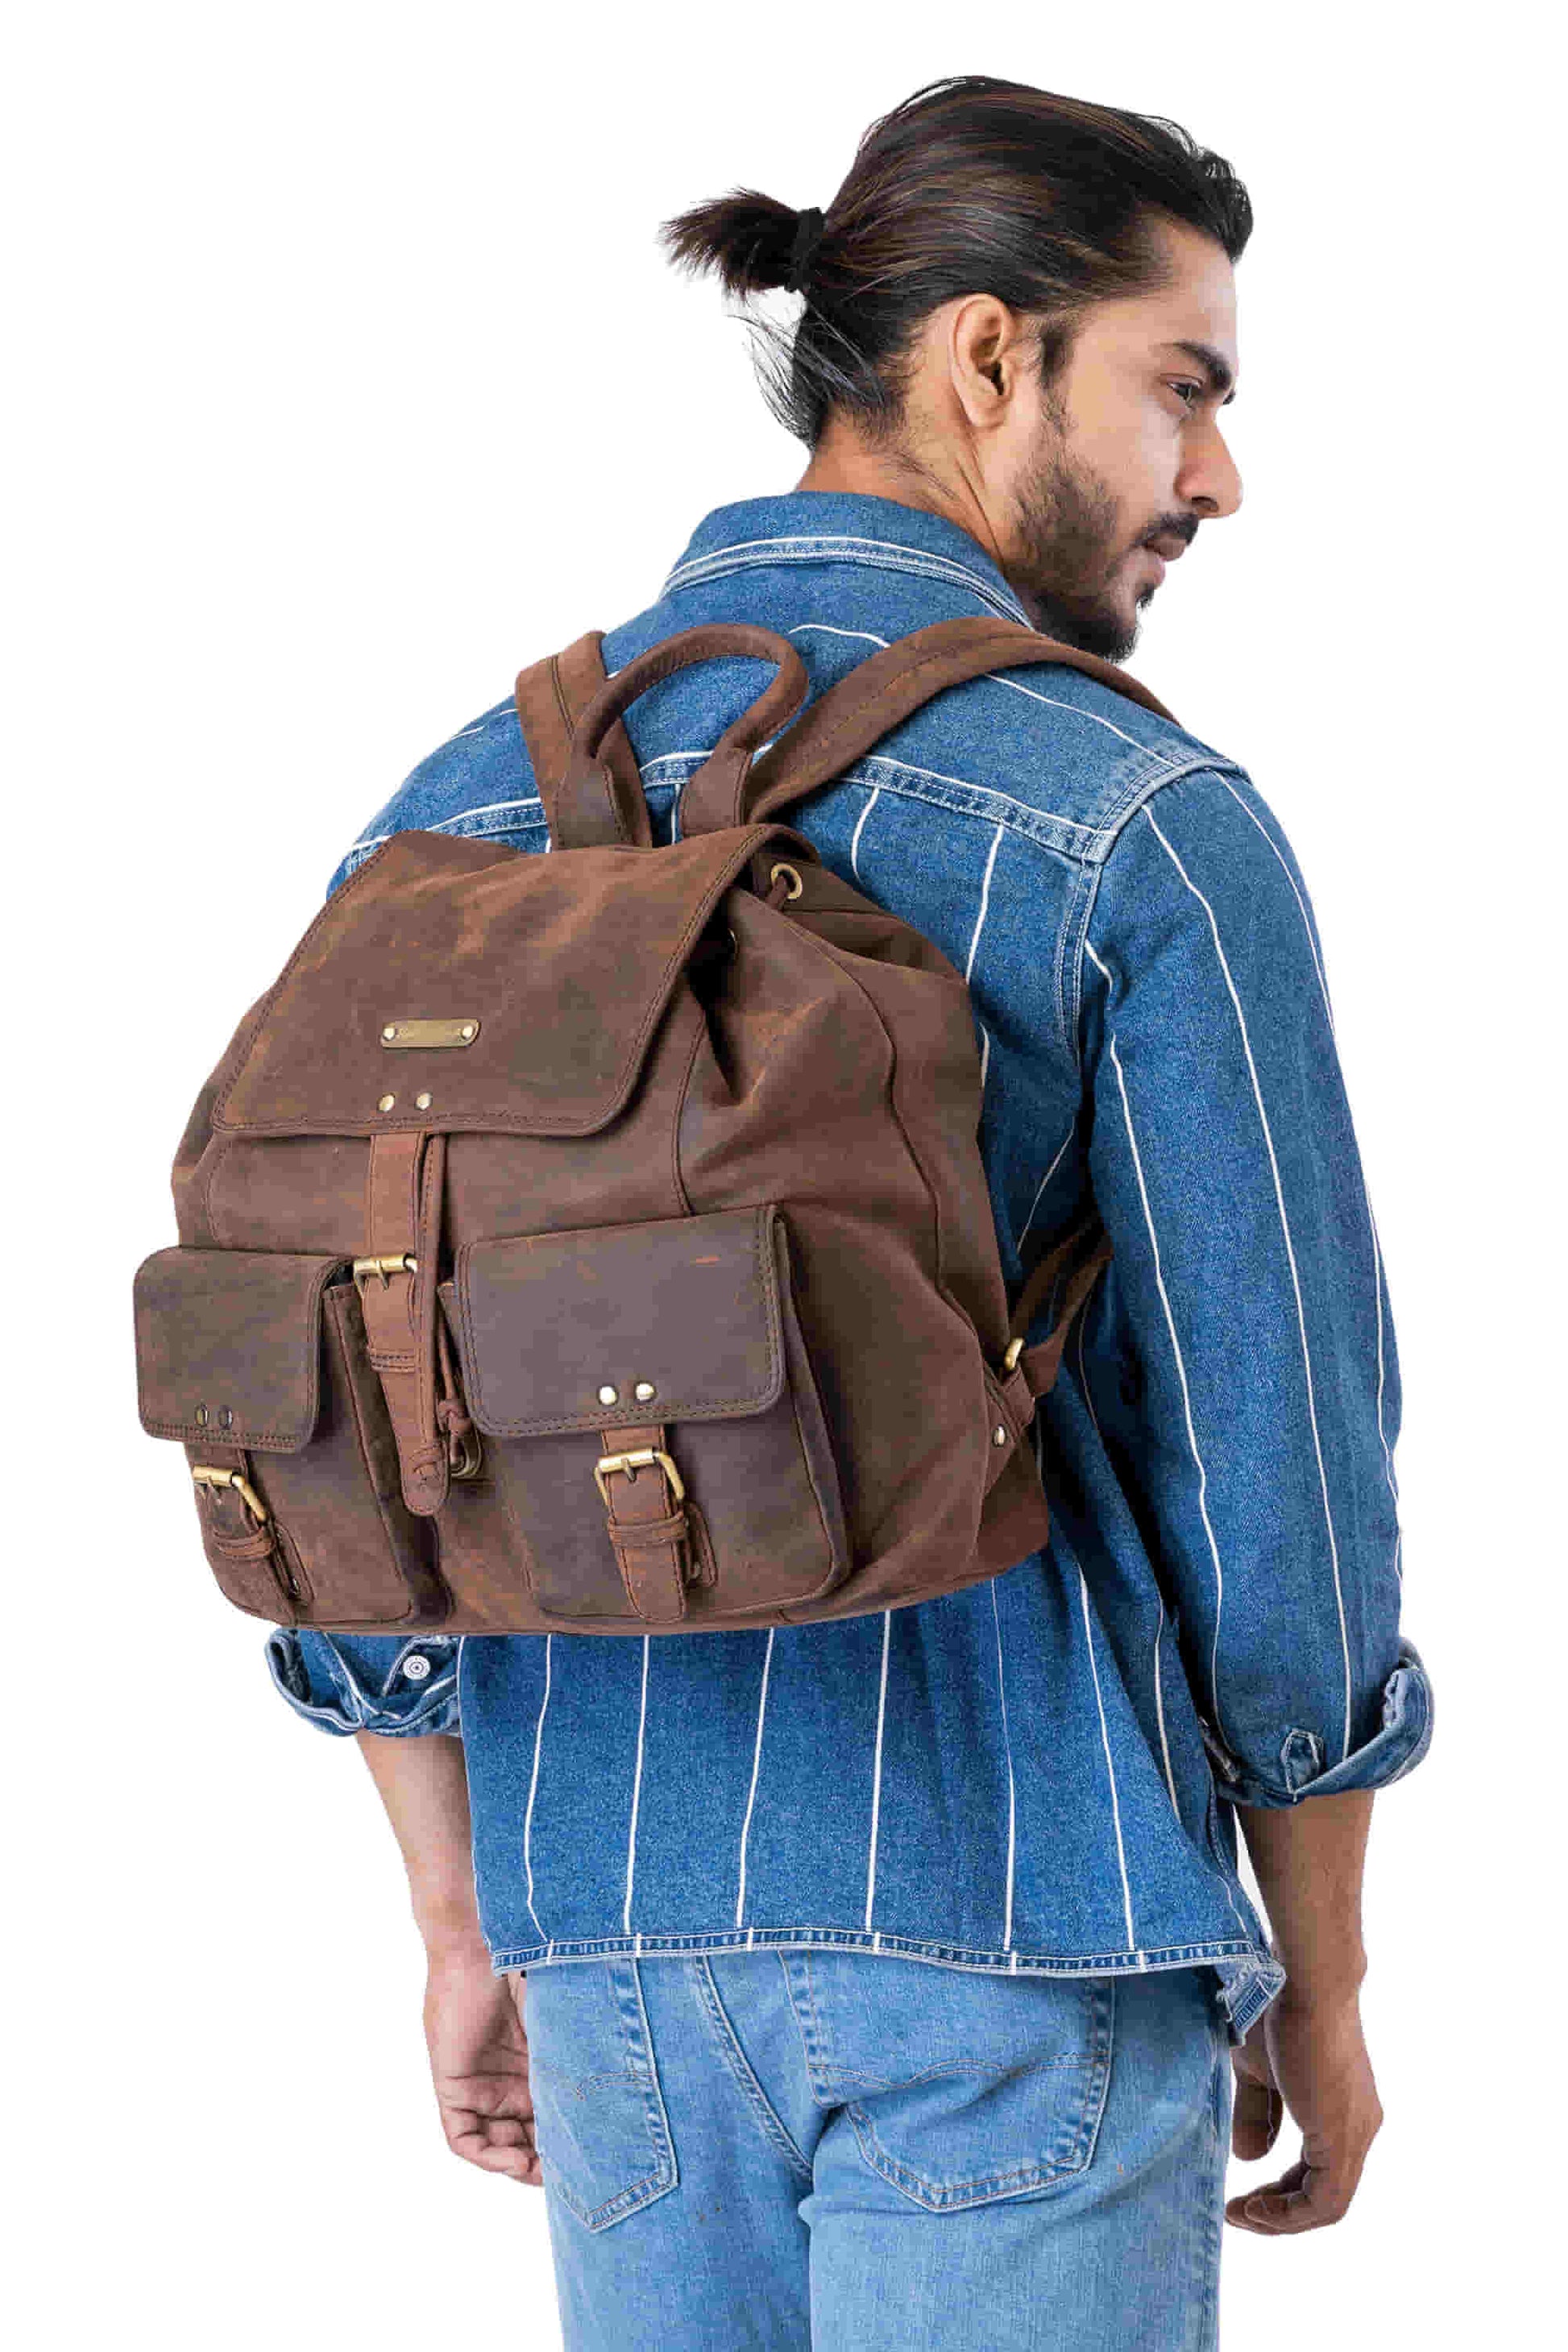 Style n Craft 392650 Backpack in Full Grain Dark Brown Hunter Leather - in use - carrying the backpack on the back using the leather shoulder straps - another view